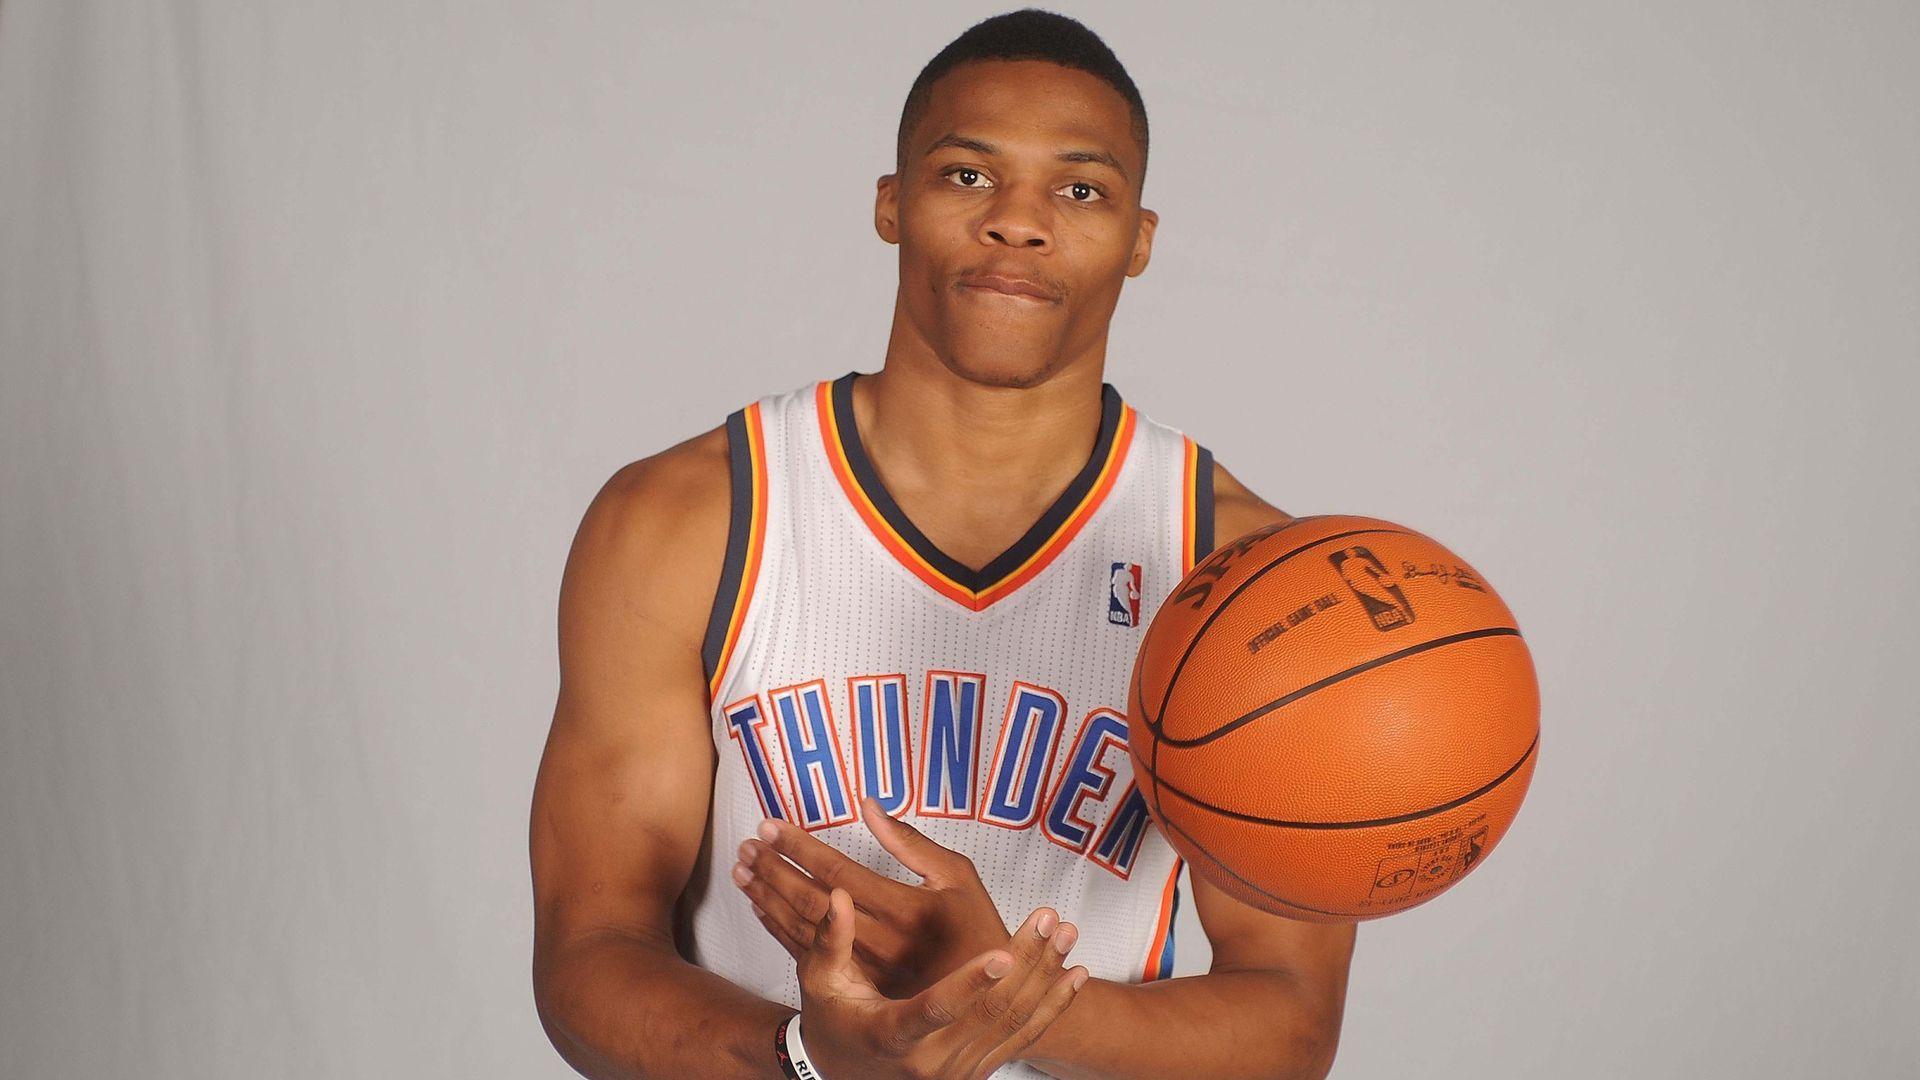 HD Russell Westbrook Wallpapers – HdCoolWallpapers.Com 3